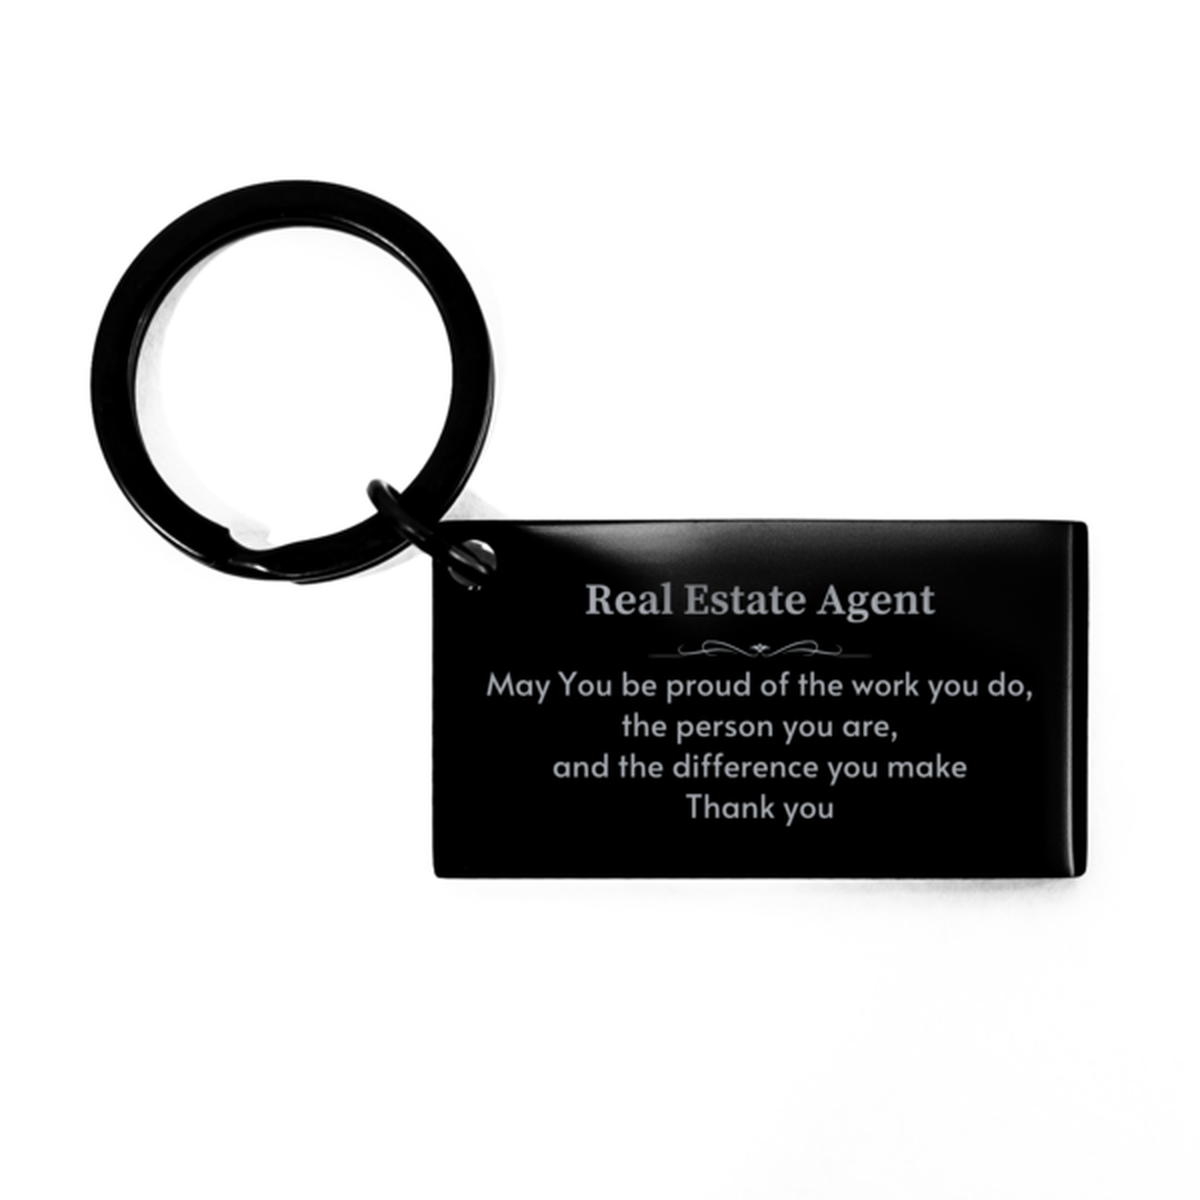 Heartwarming Keychain Retirement Coworkers Gifts for Real Estate Agent, Surveyor May You be proud of the work you do, the person you are Gifts for Boss Men Women Friends